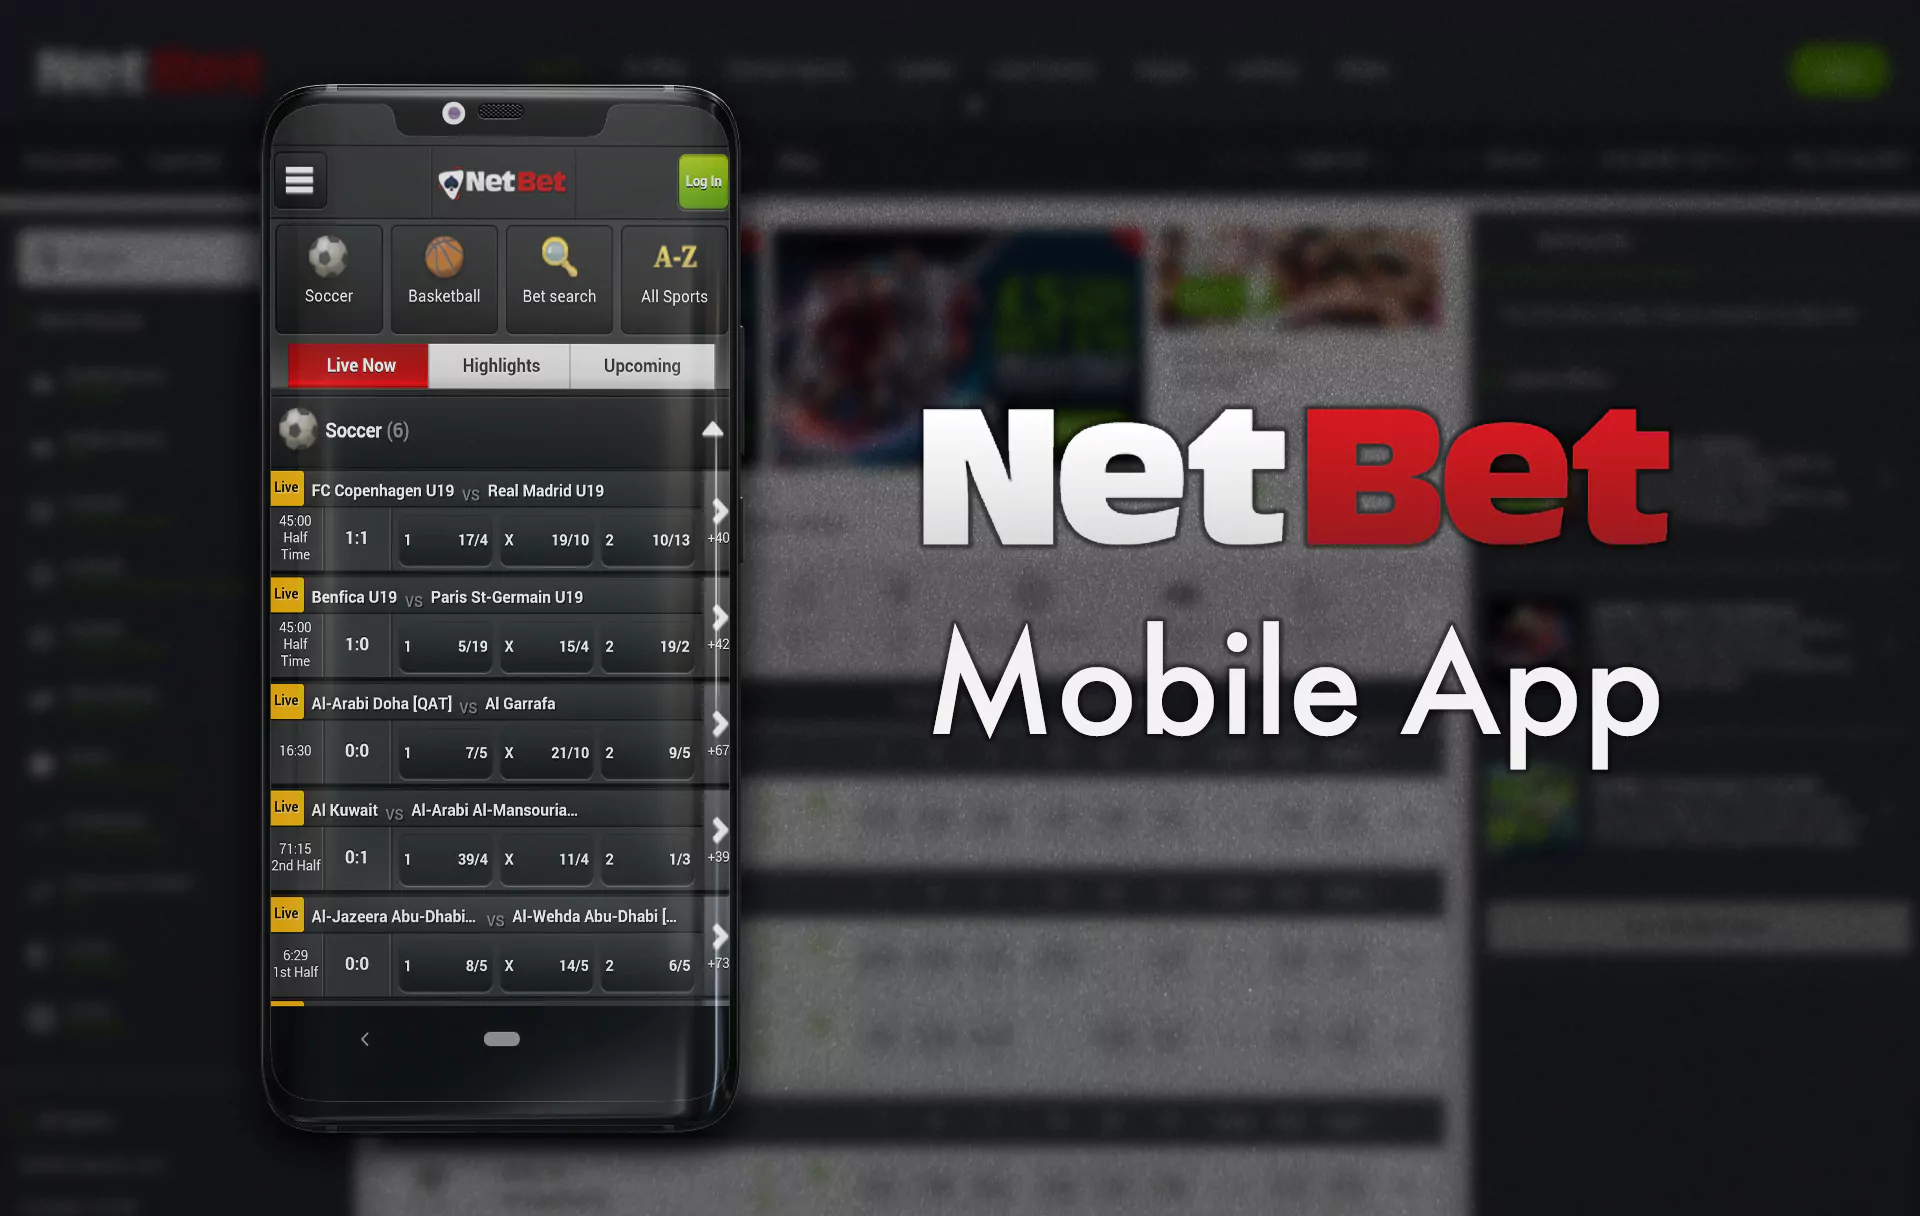 If you use the Netbet account regularly, we highly recommend downloading the app.